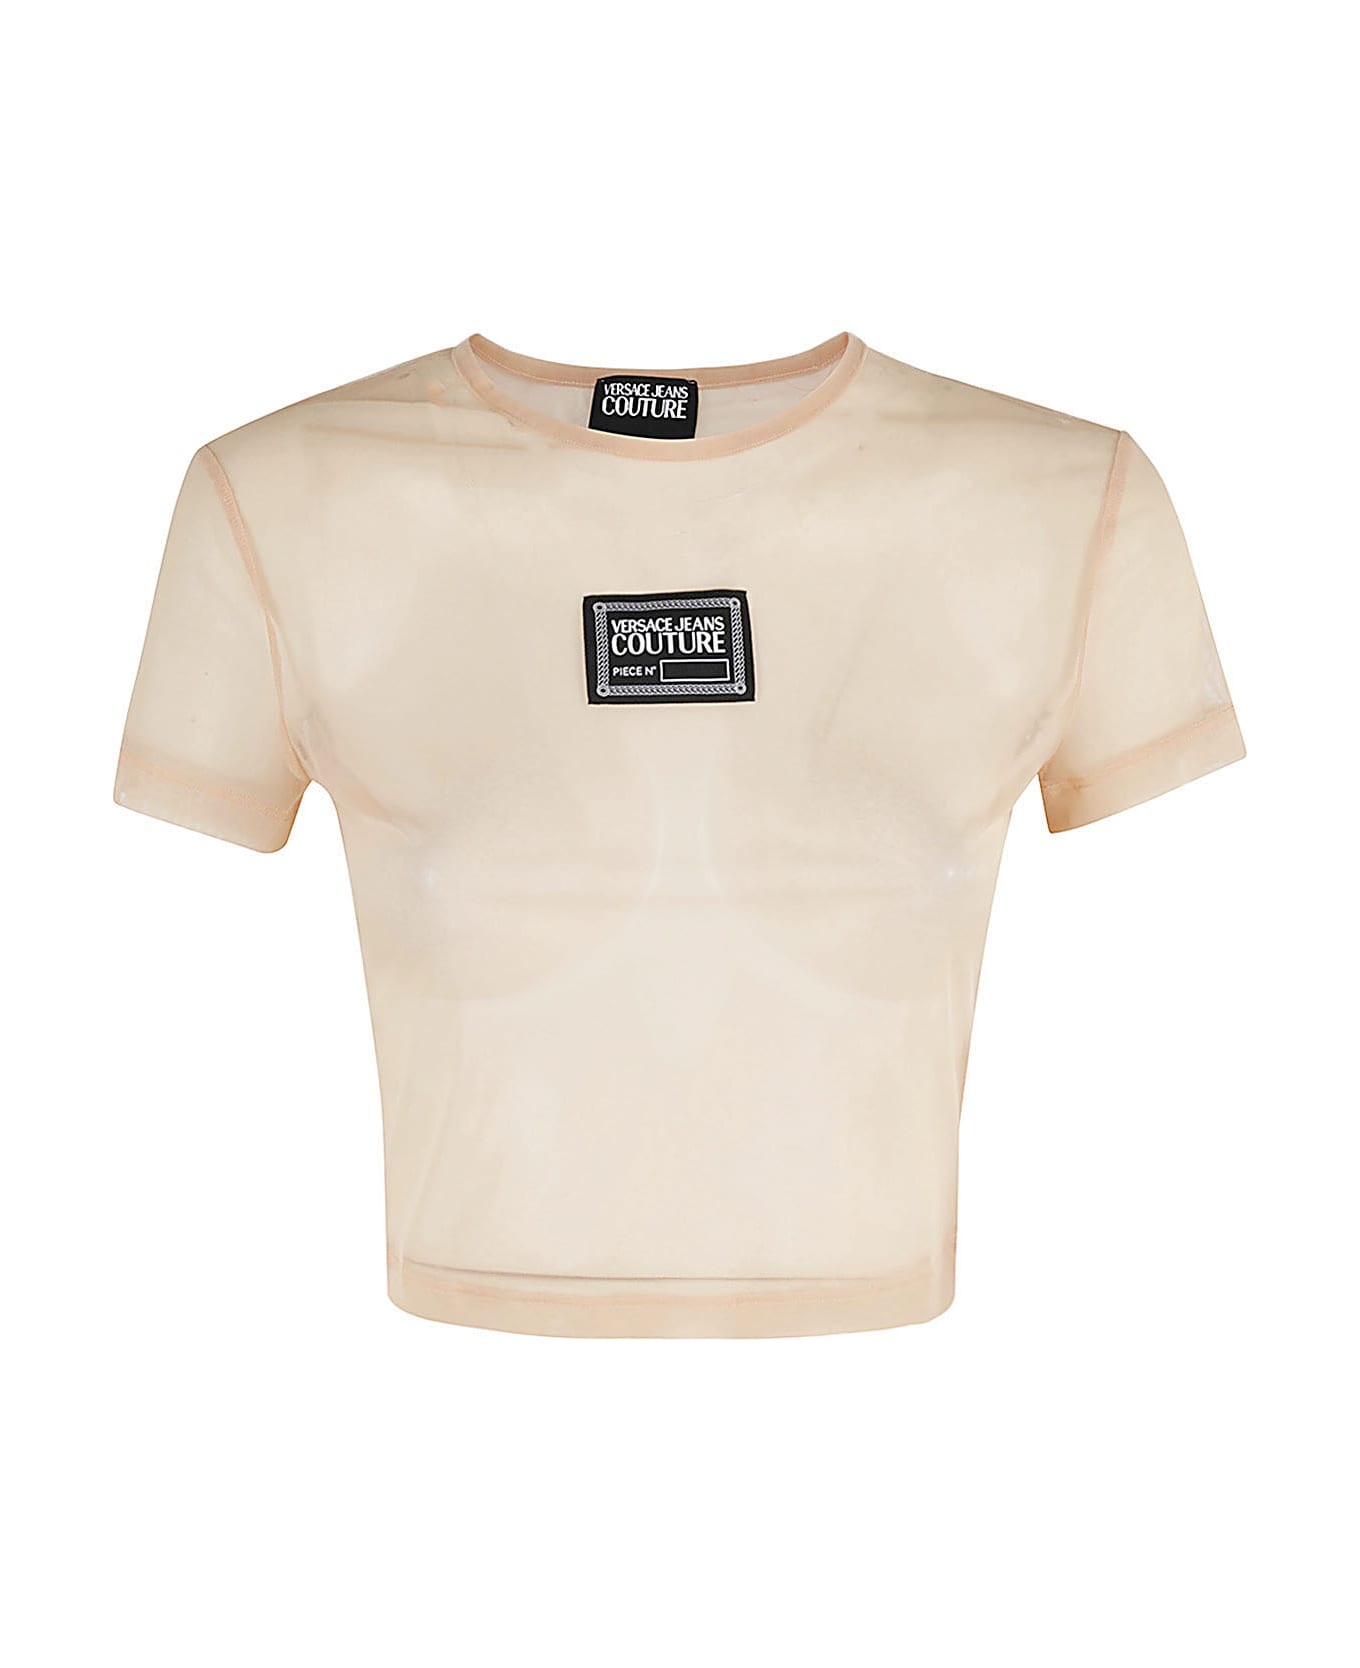 Versace Jeans Couture Tulle Stretch T-shirt - Toffee Tシャツ